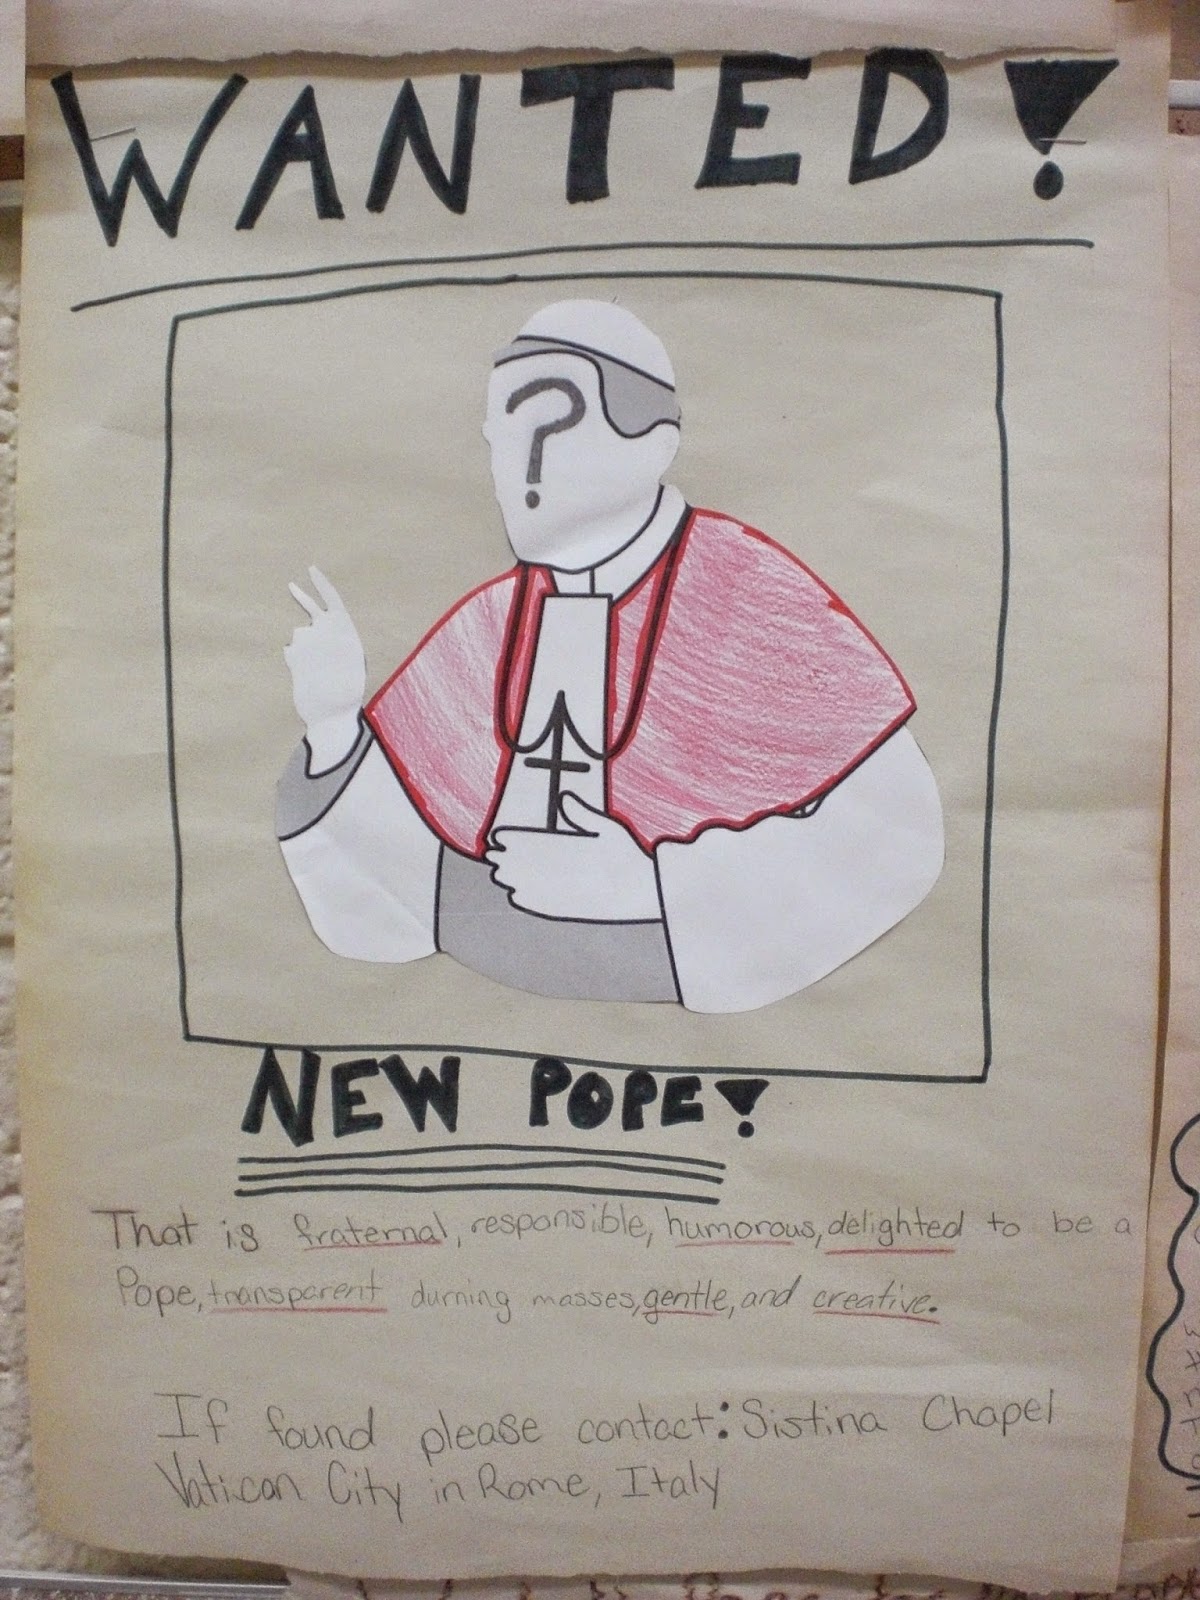 Look to Him and be Radiant: Pope Wanted Posters
 Example Of A Wanted Poster